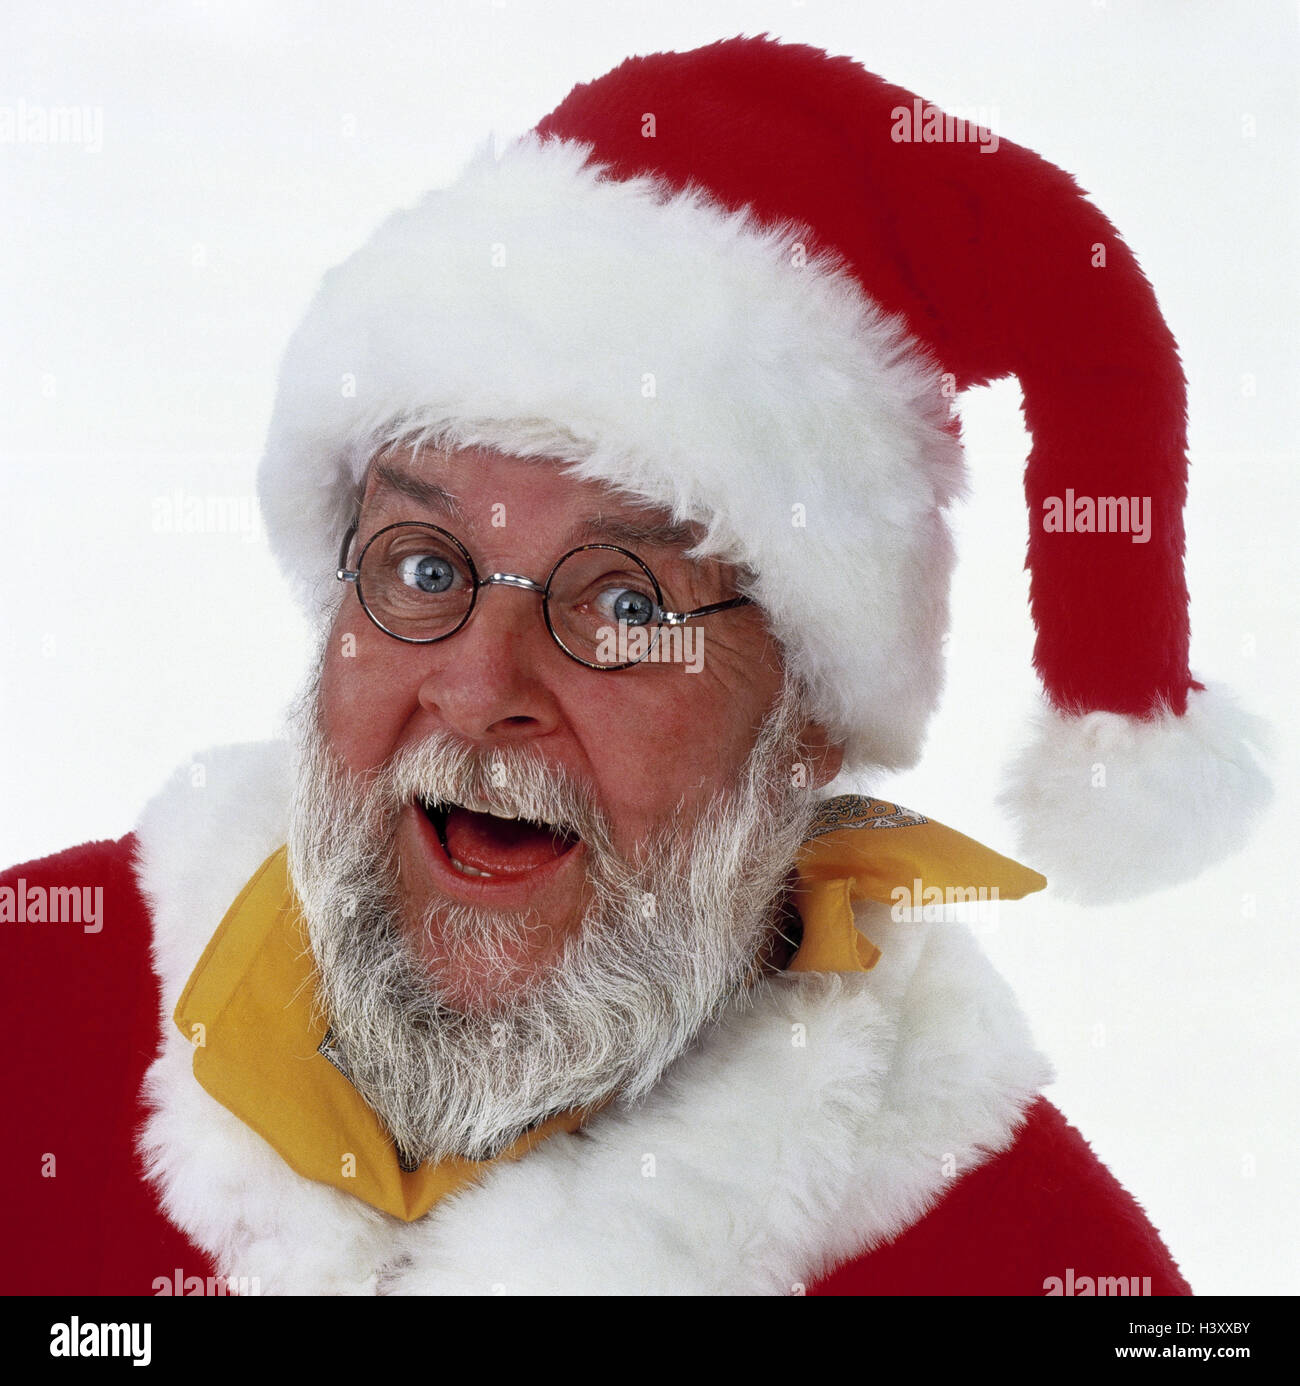 Santa Claus, glasses, facial play, portrait, Christmas, x-mas, Christmas, Santa Claus, Santa, beard, view camera, happy, laugh, cheerfulness, cheerfulness, humor, humorously, studio, inside, cut out, Stock Photo